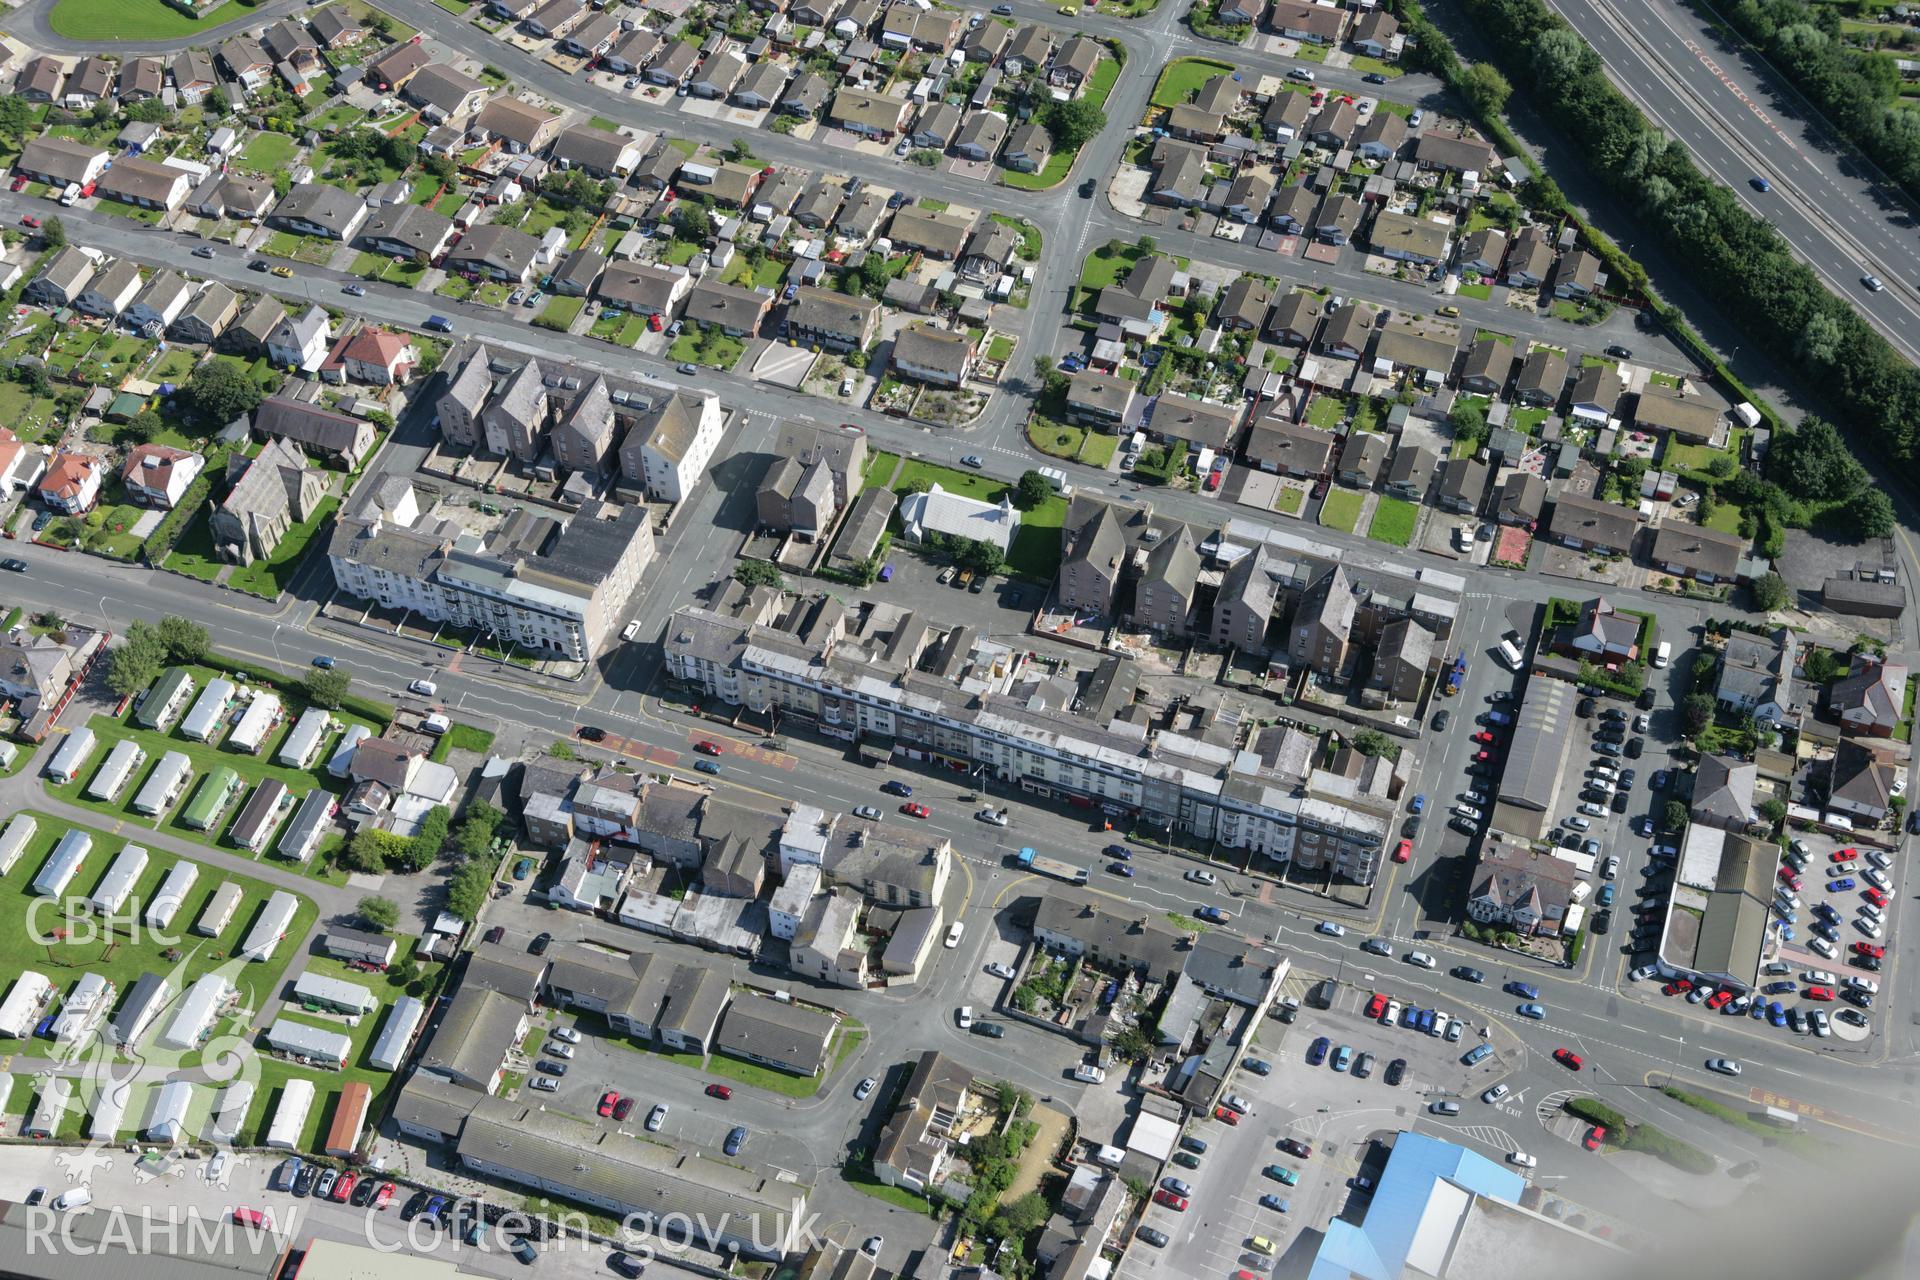 RCAHMW colour oblique aerial photograph of Abergele. Taken on 31 July 2007 by Toby Driver